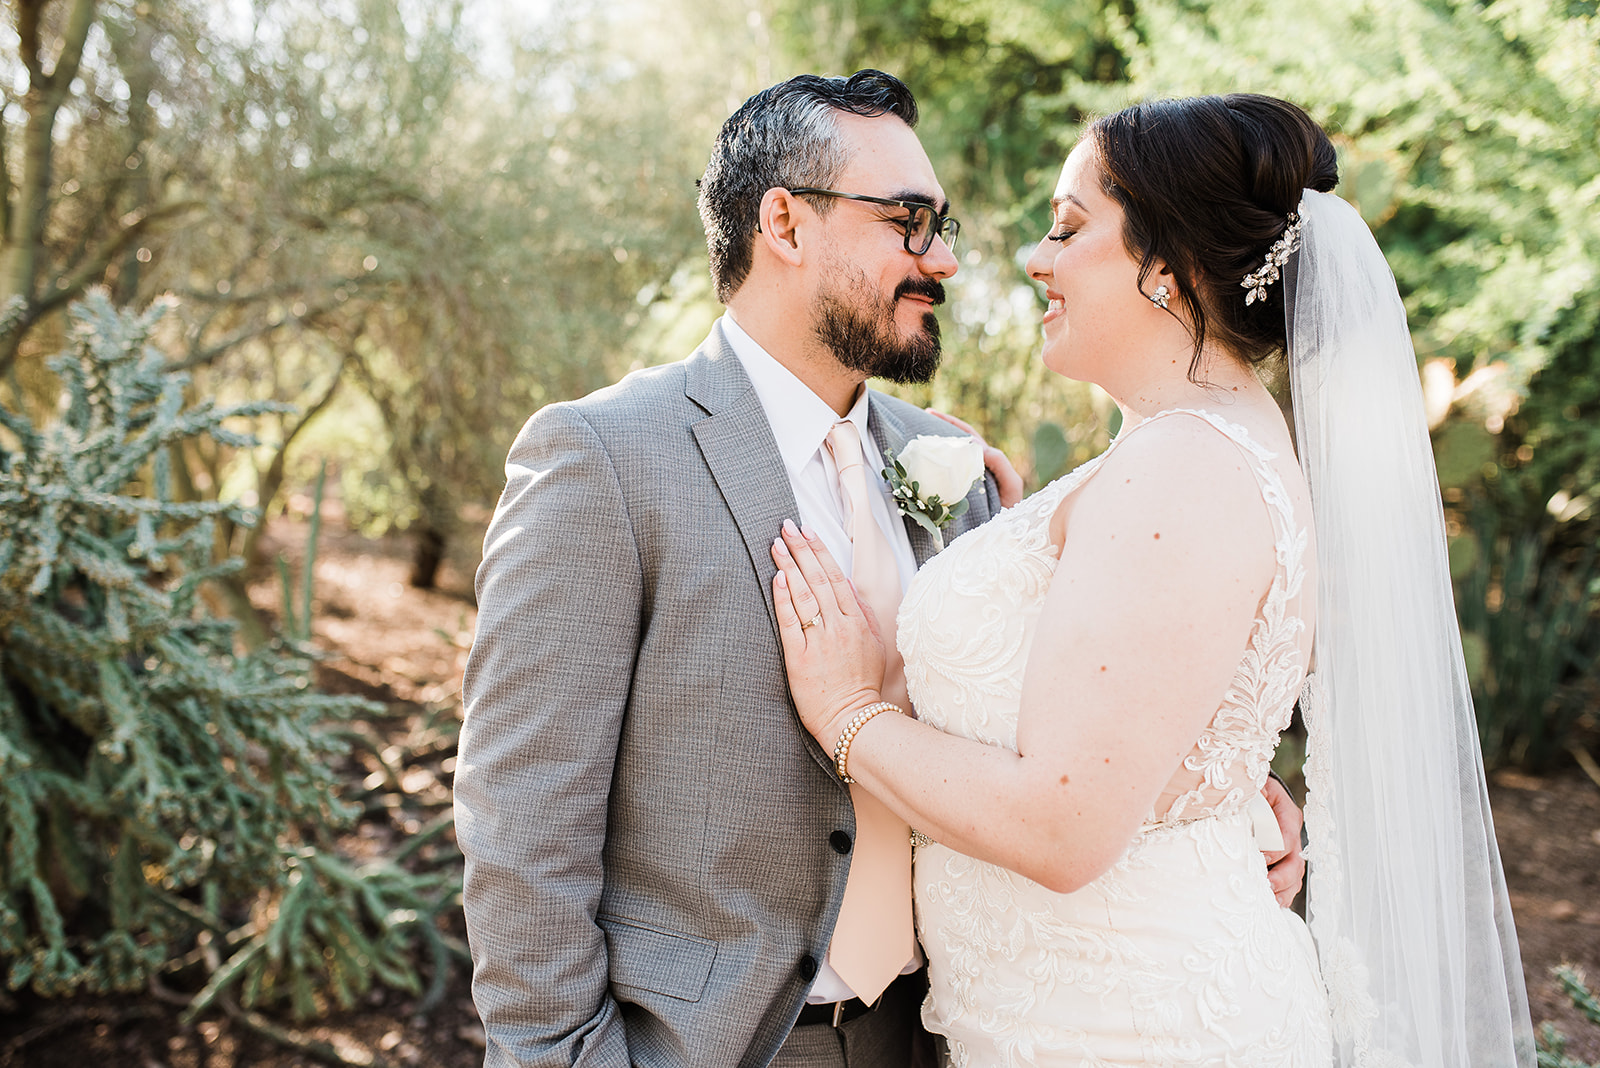 Newlyweds stand nose to nose in a desert garden while the bride wears a white lace dress and long veil at Bella Rose Estate Wedding